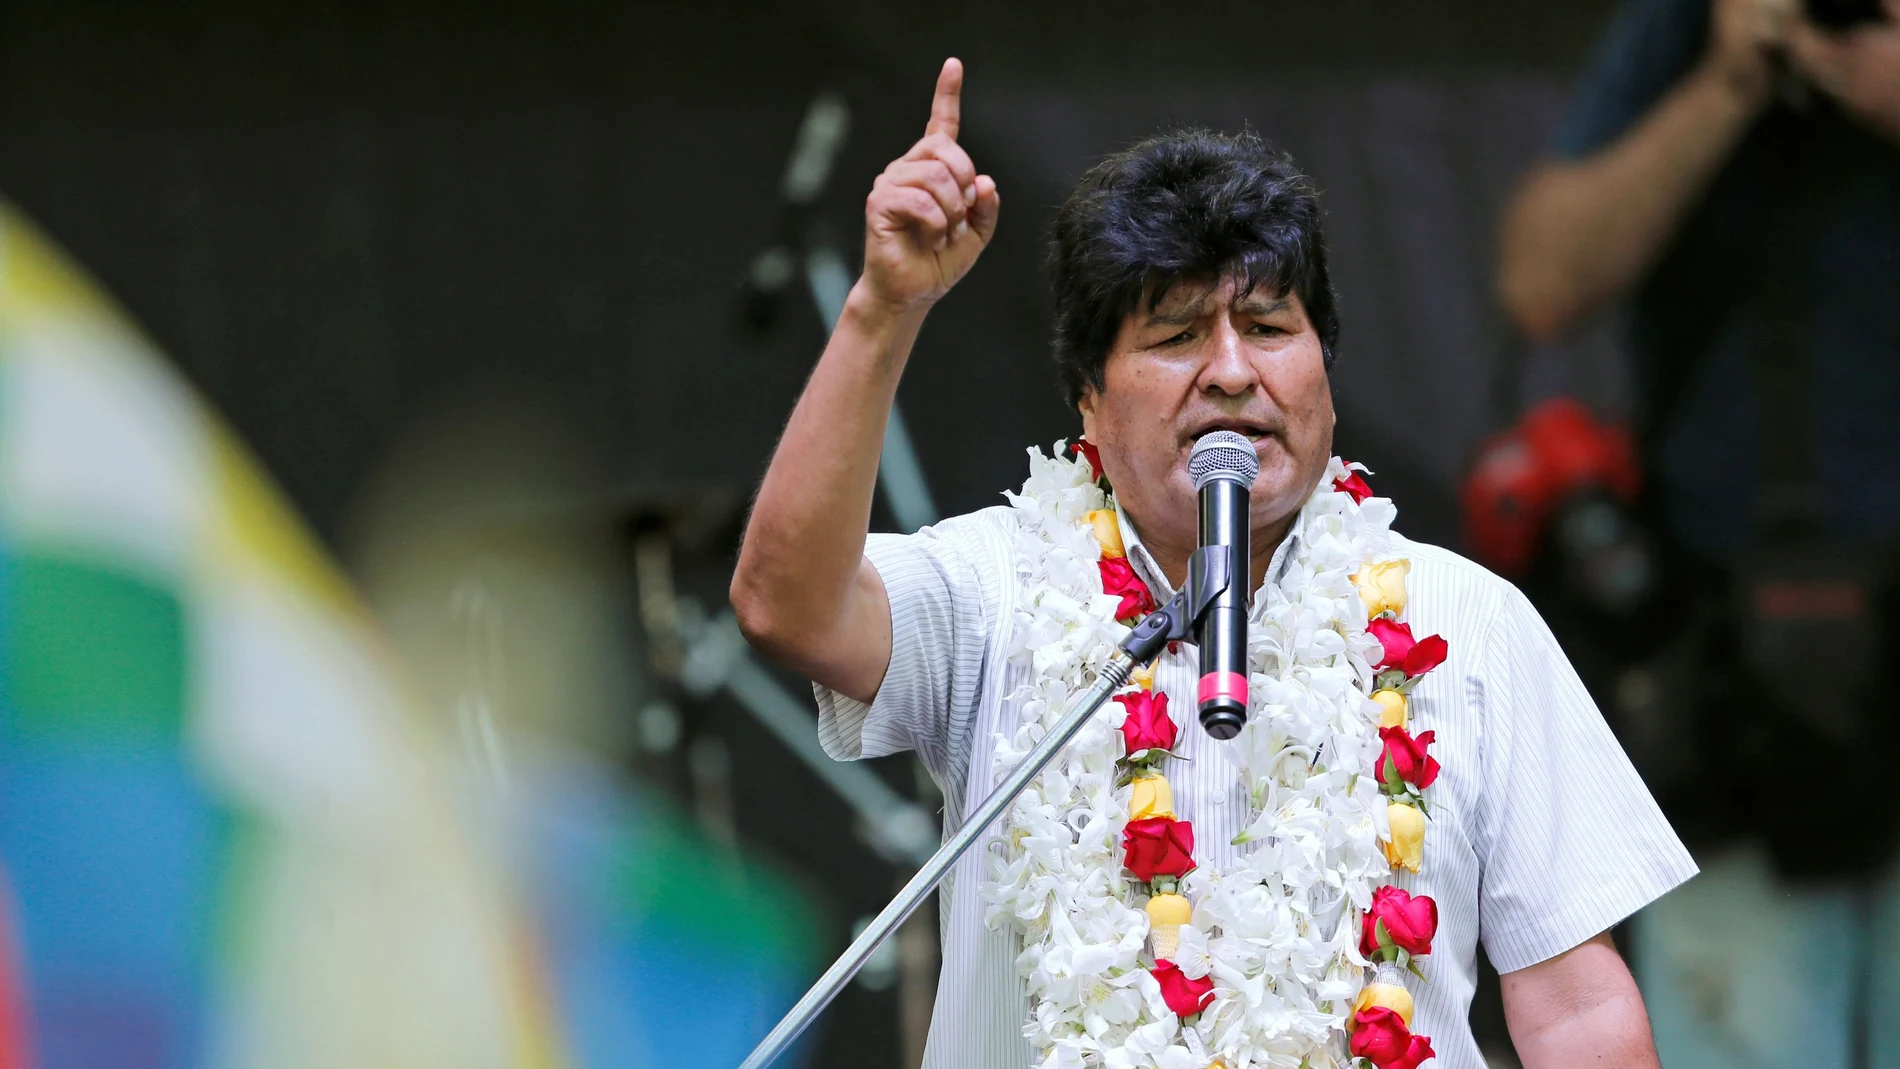 FILE PHOTO: Bolivia's former President Evo Morales attends a celebration of Bolivia's Plurinational State Foundation Day, in Buenos Aires